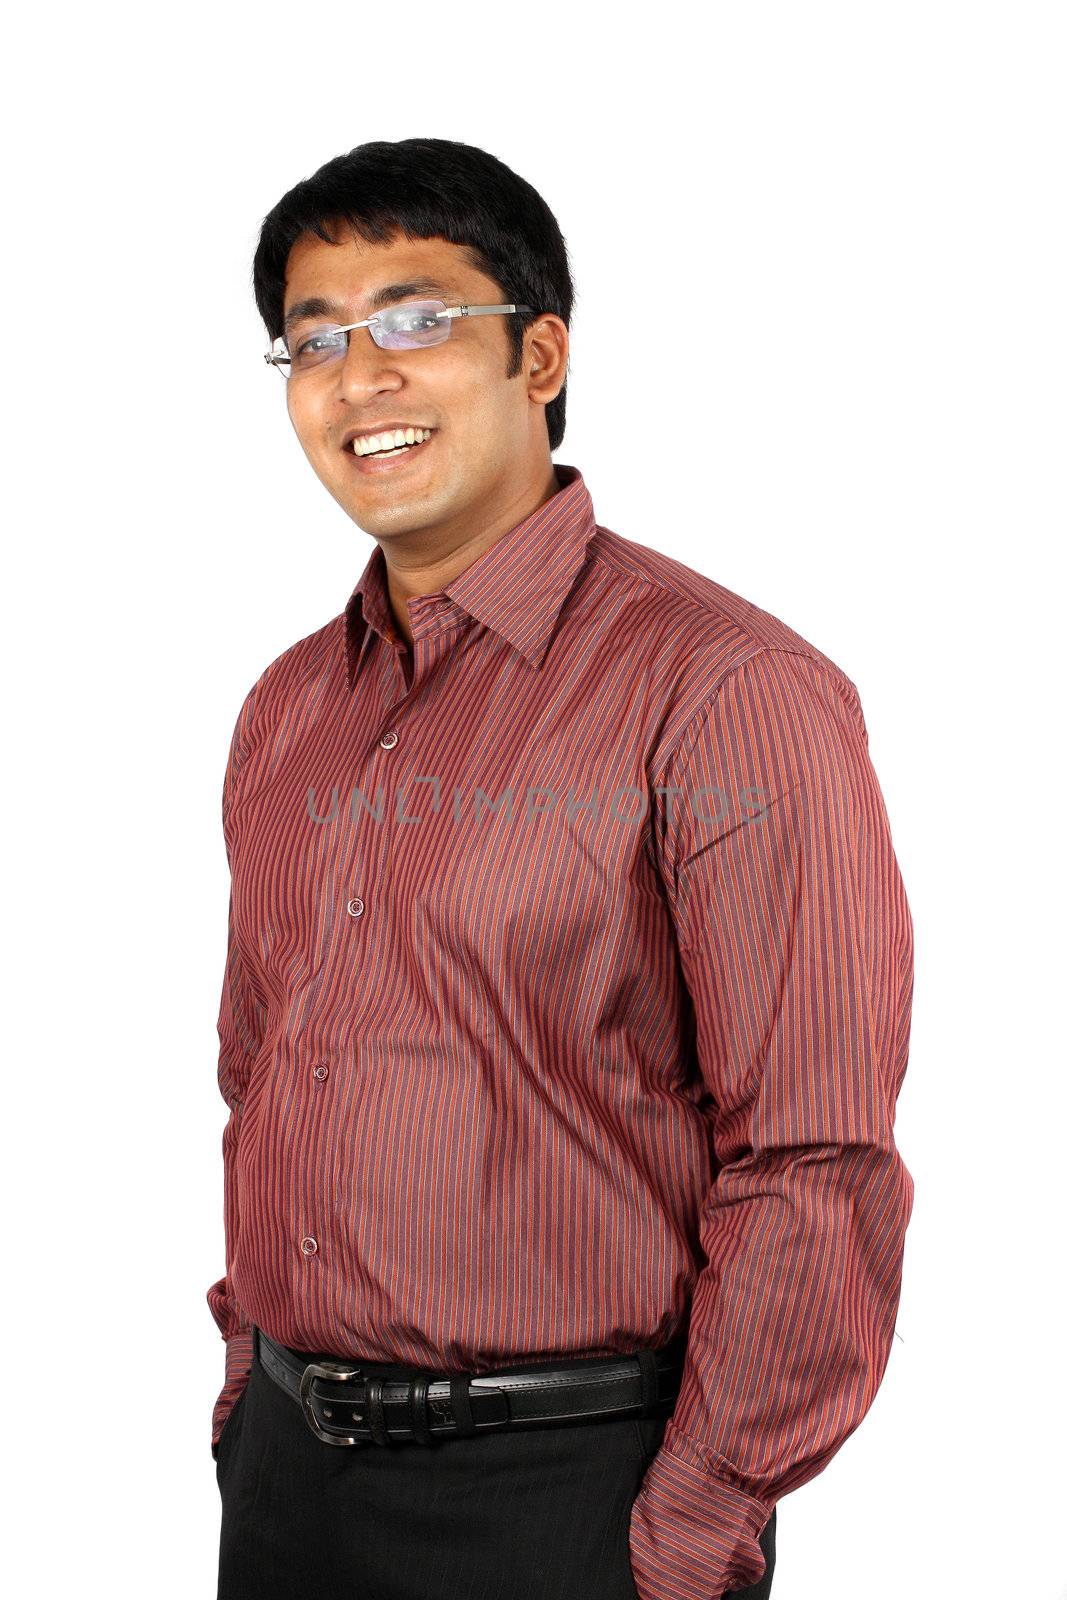 A portrait of a young Indian businessman, on white studio background.